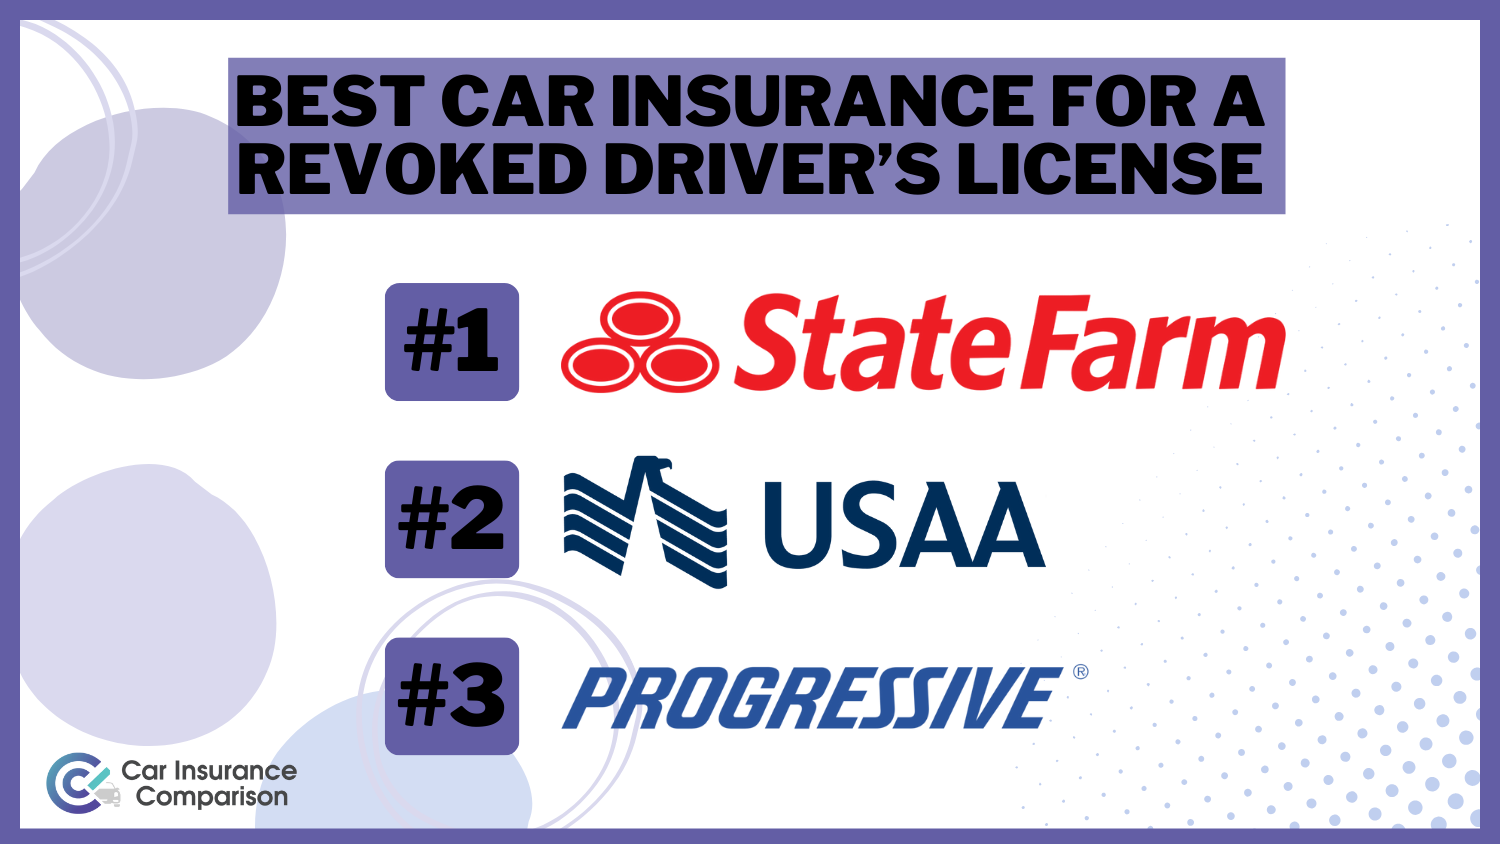 Best Car Insurance For A Revoked Driver's License